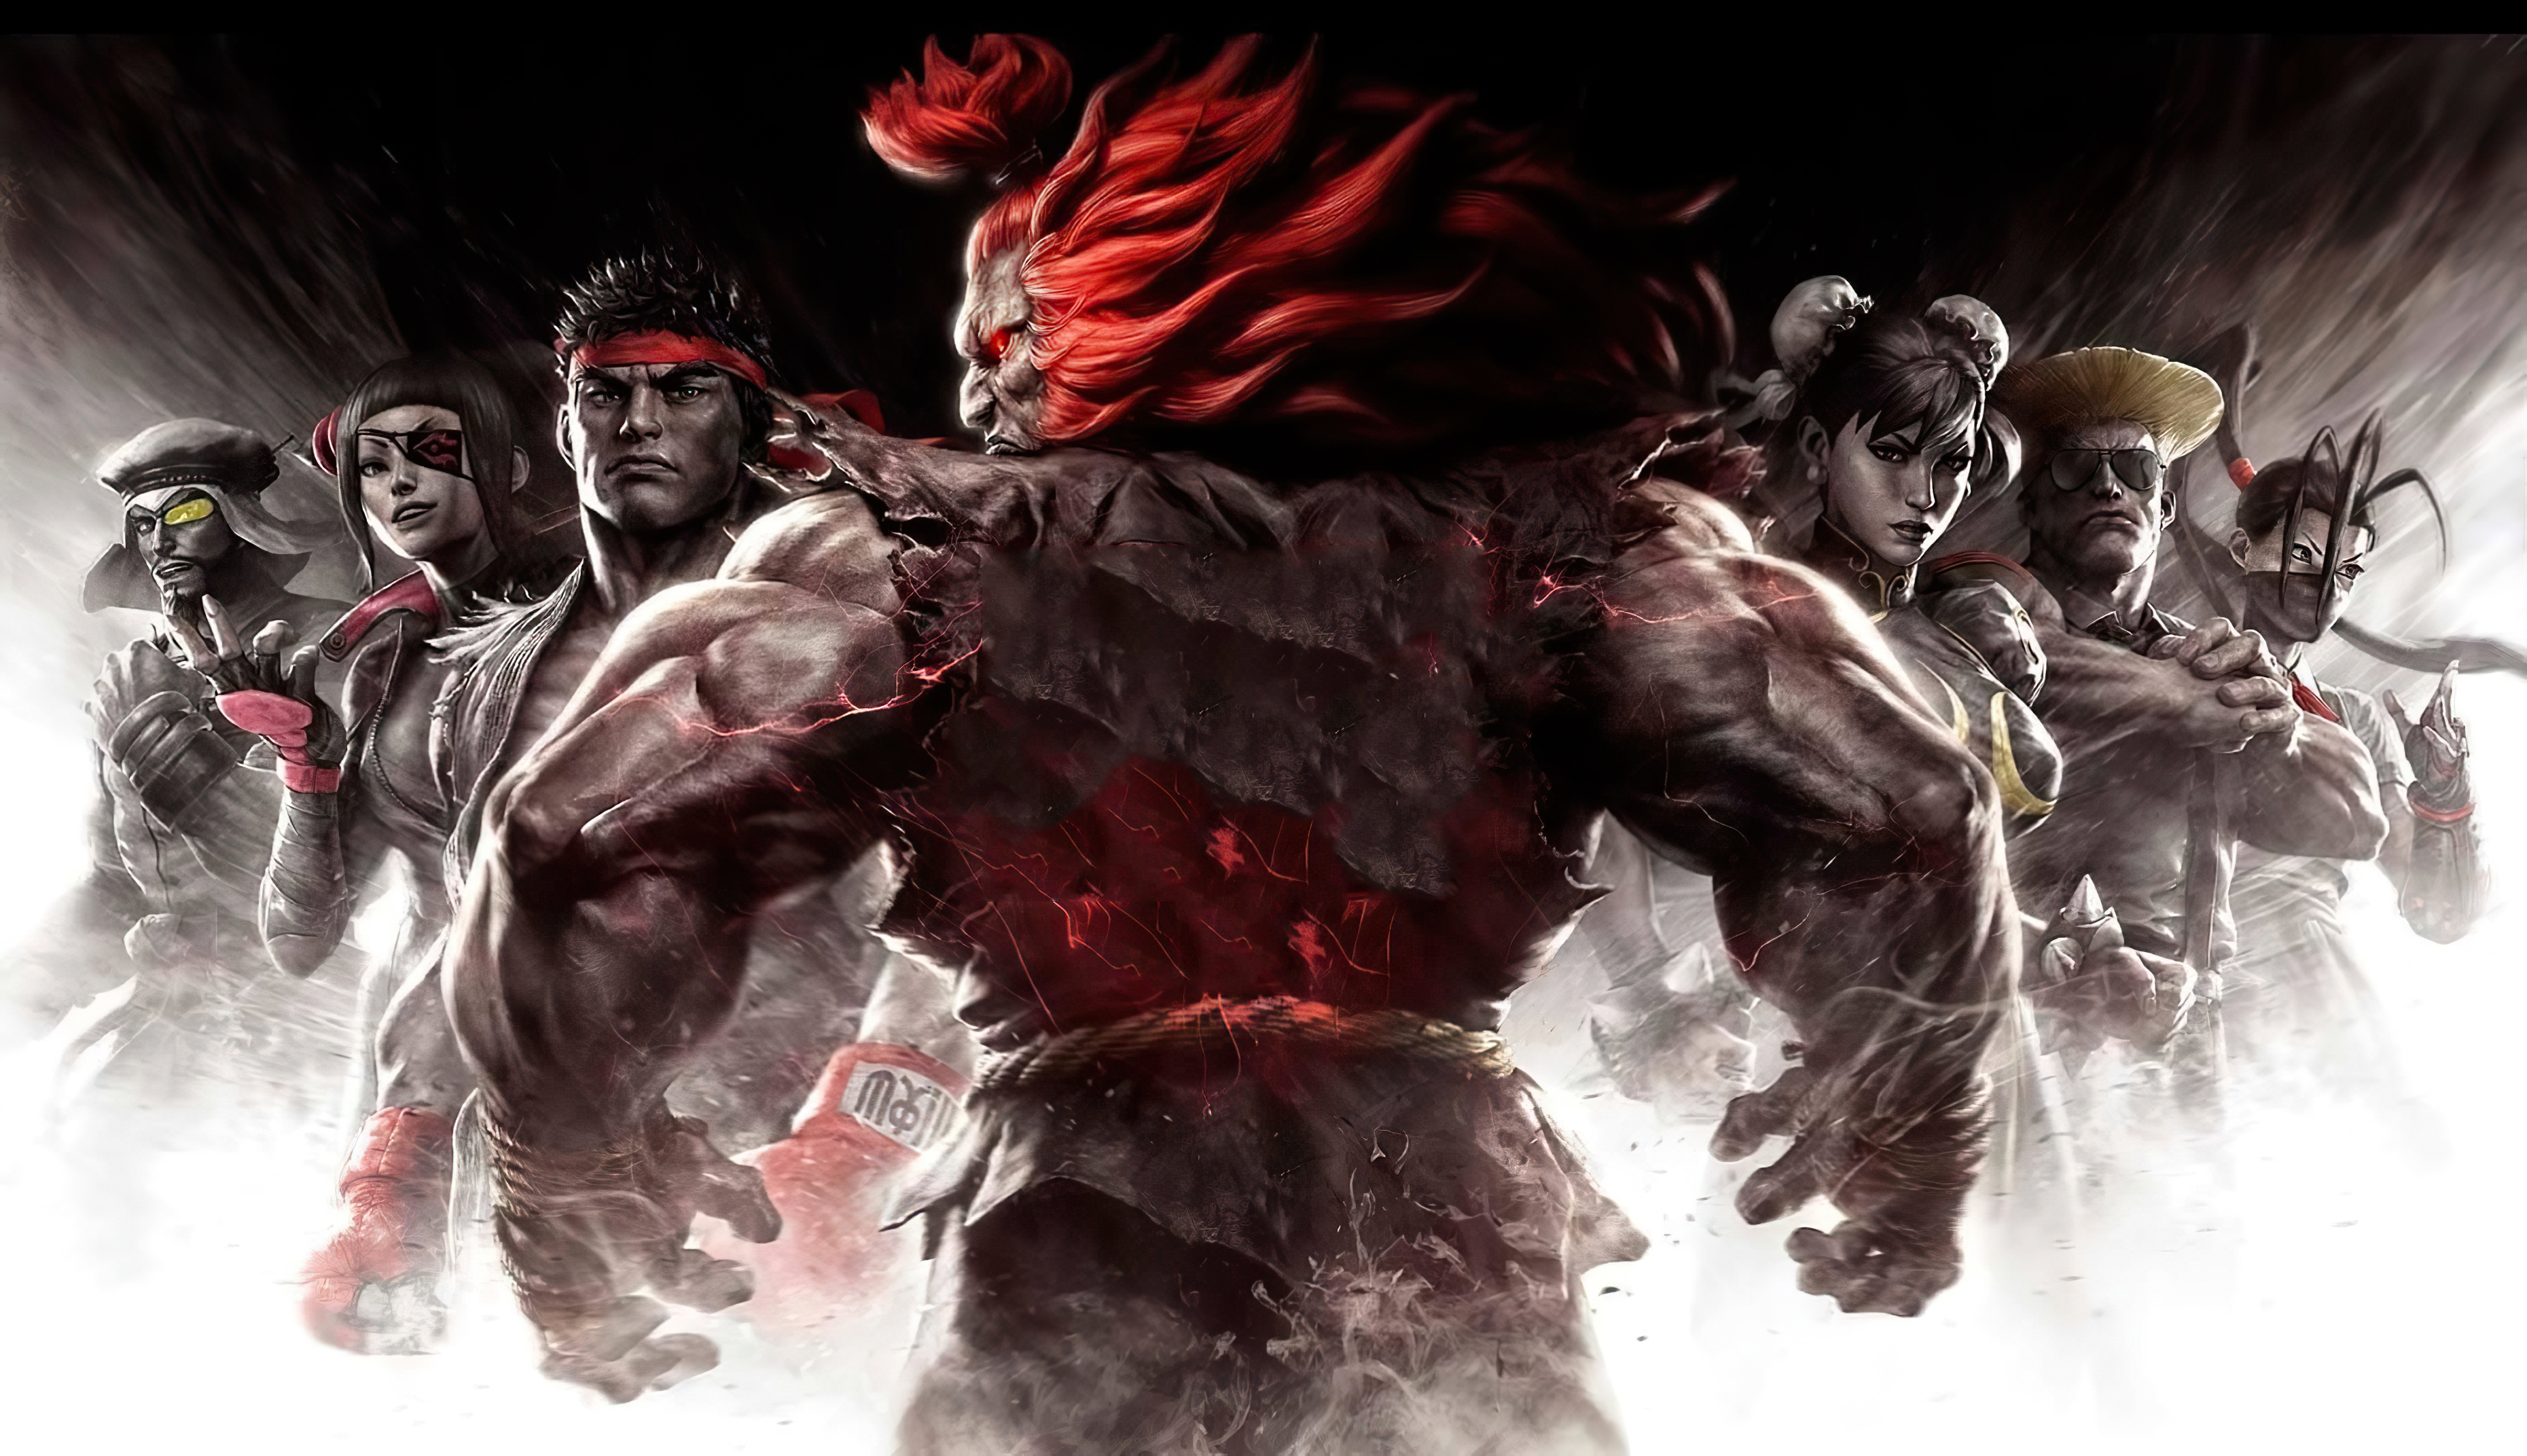 1336x768 Street Fighter 5 Hd Laptop Wallpaper Hd Games 4k Wallpapers Images Photos And Background Wallpapers Den